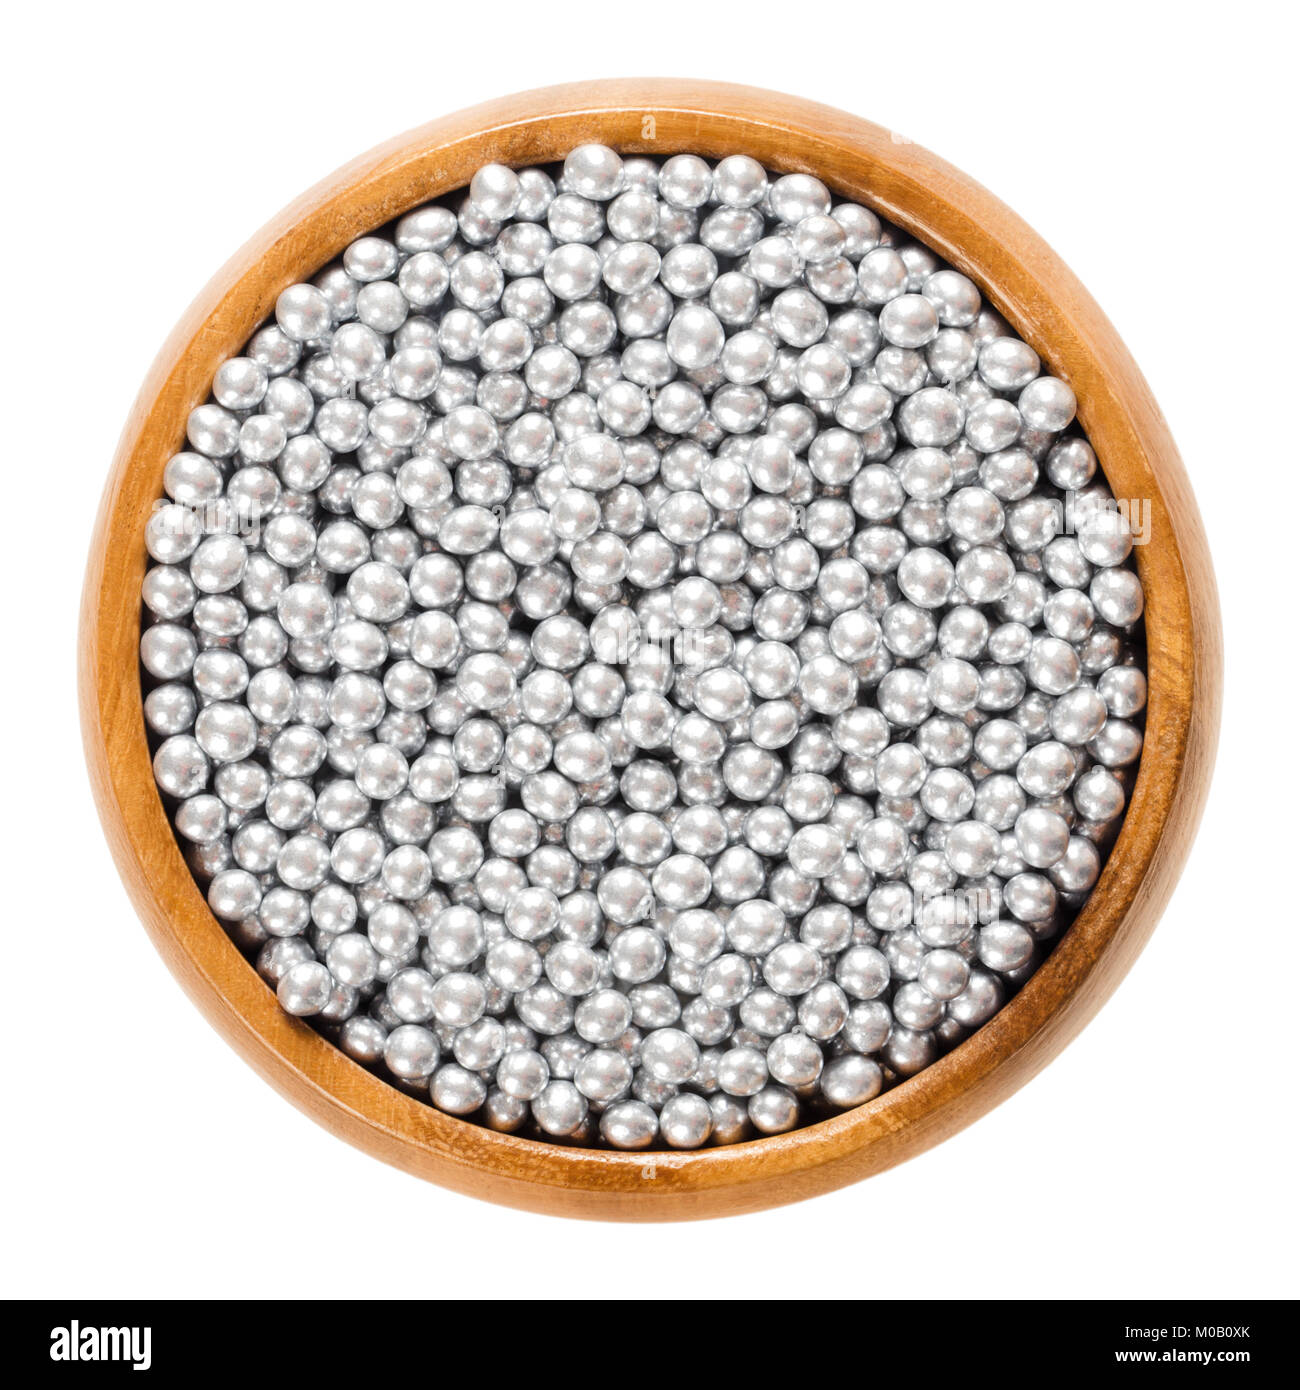 Silver nonpareils in wooden bowl. Hundreds and thousands. Decorative confectionery of tiny balls, made with sugar and starch, used for decoration. Stock Photo